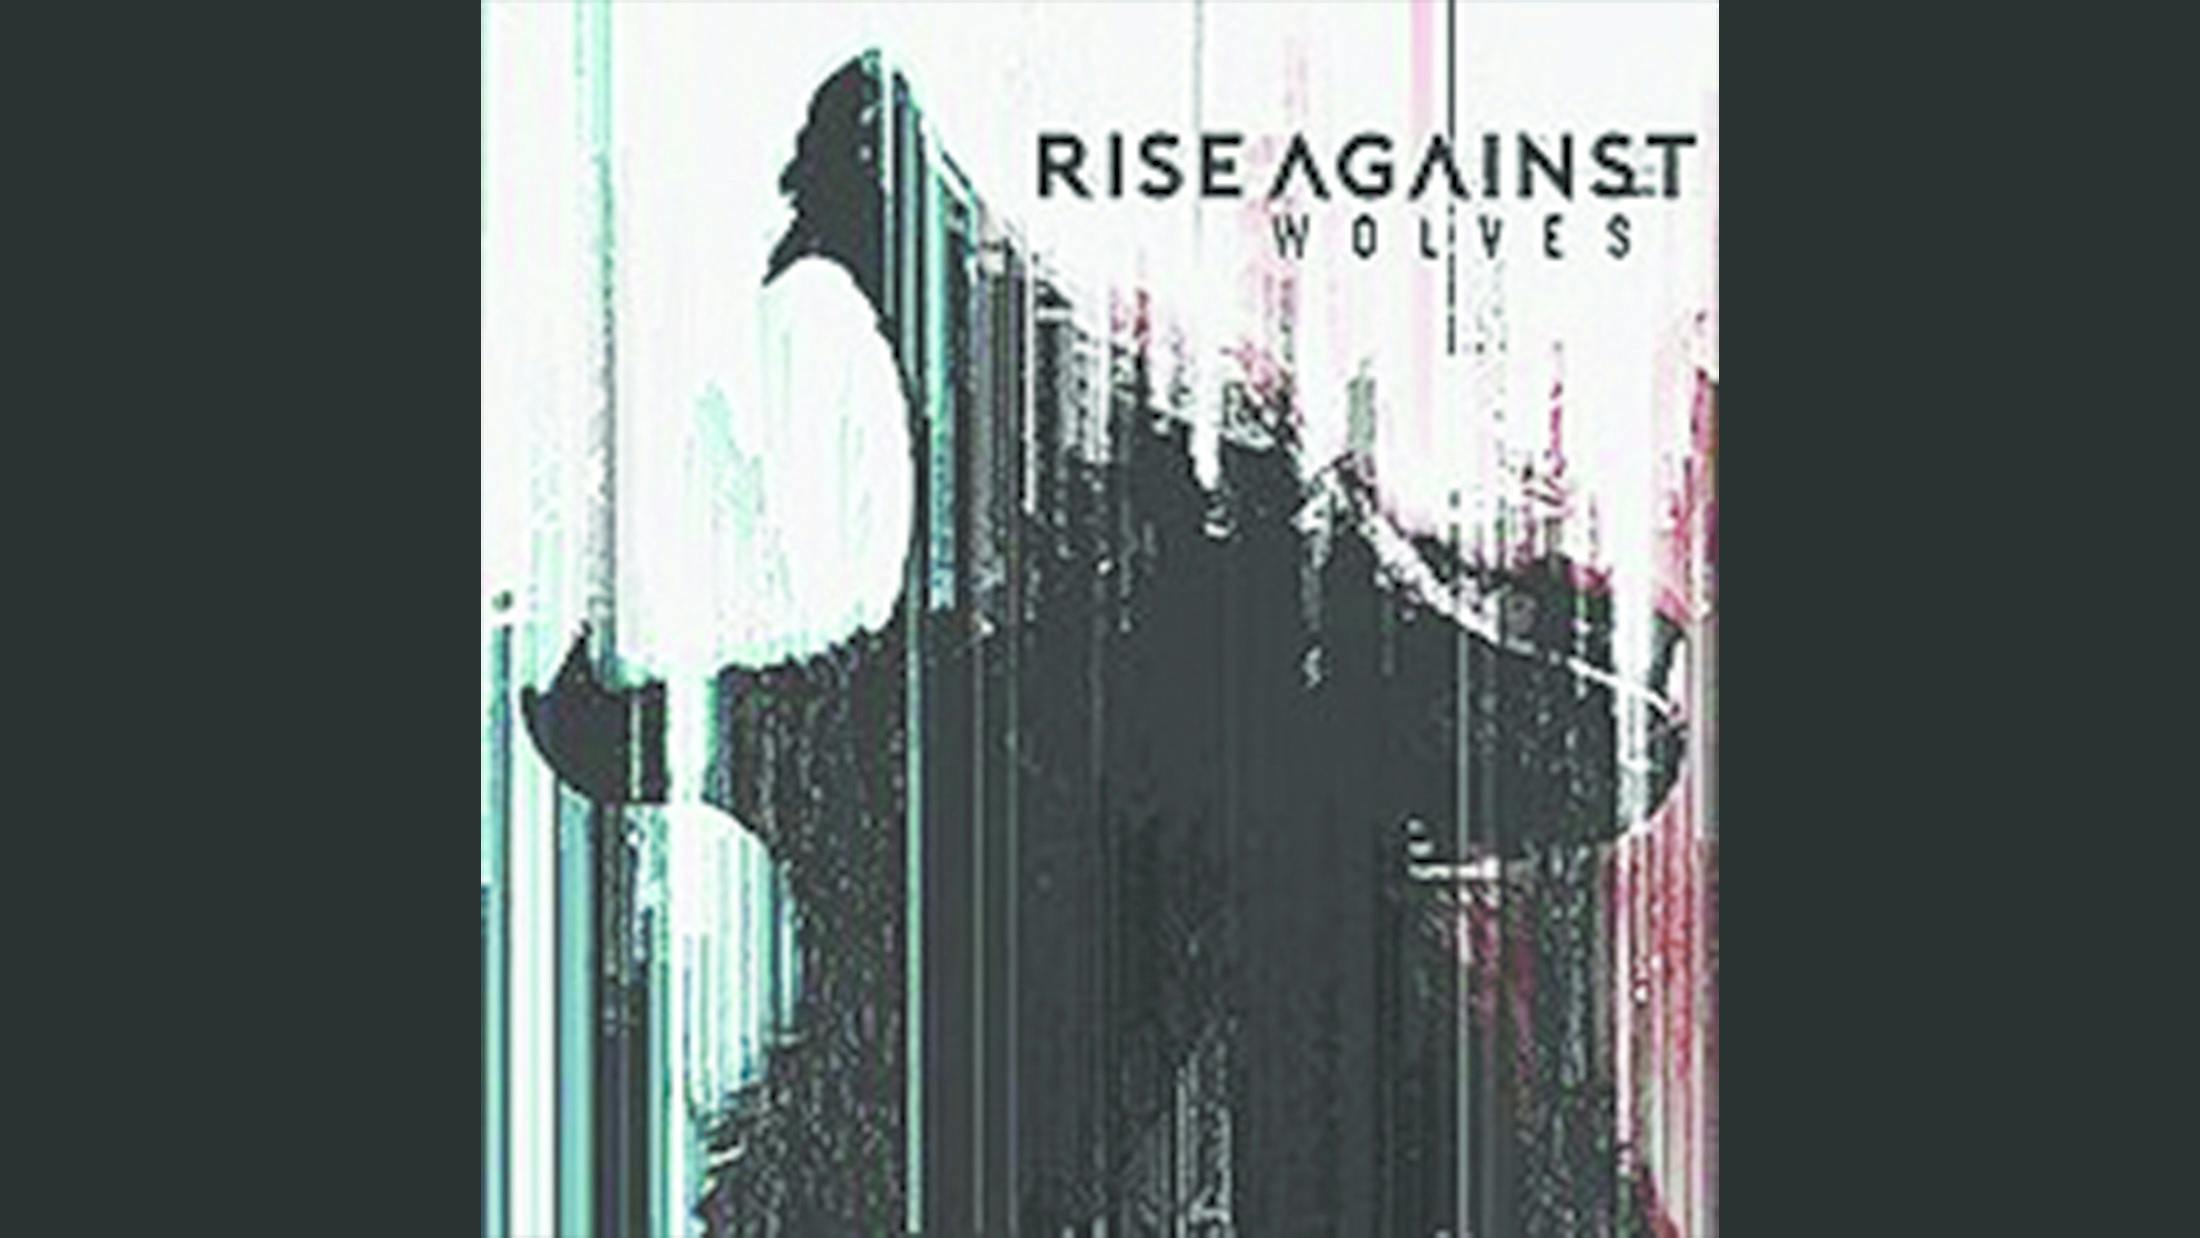 Plenty of bands responded to our troubled times with passion and defiance in 2017. Of them all, it was Rise Against’s dissent that hit hardest. Whether it’s the unstoppable drive of The Violence, the skanking wake-up call of Bullshit or the protest anthem Wolves, this was the sound of a band refusing to back down.